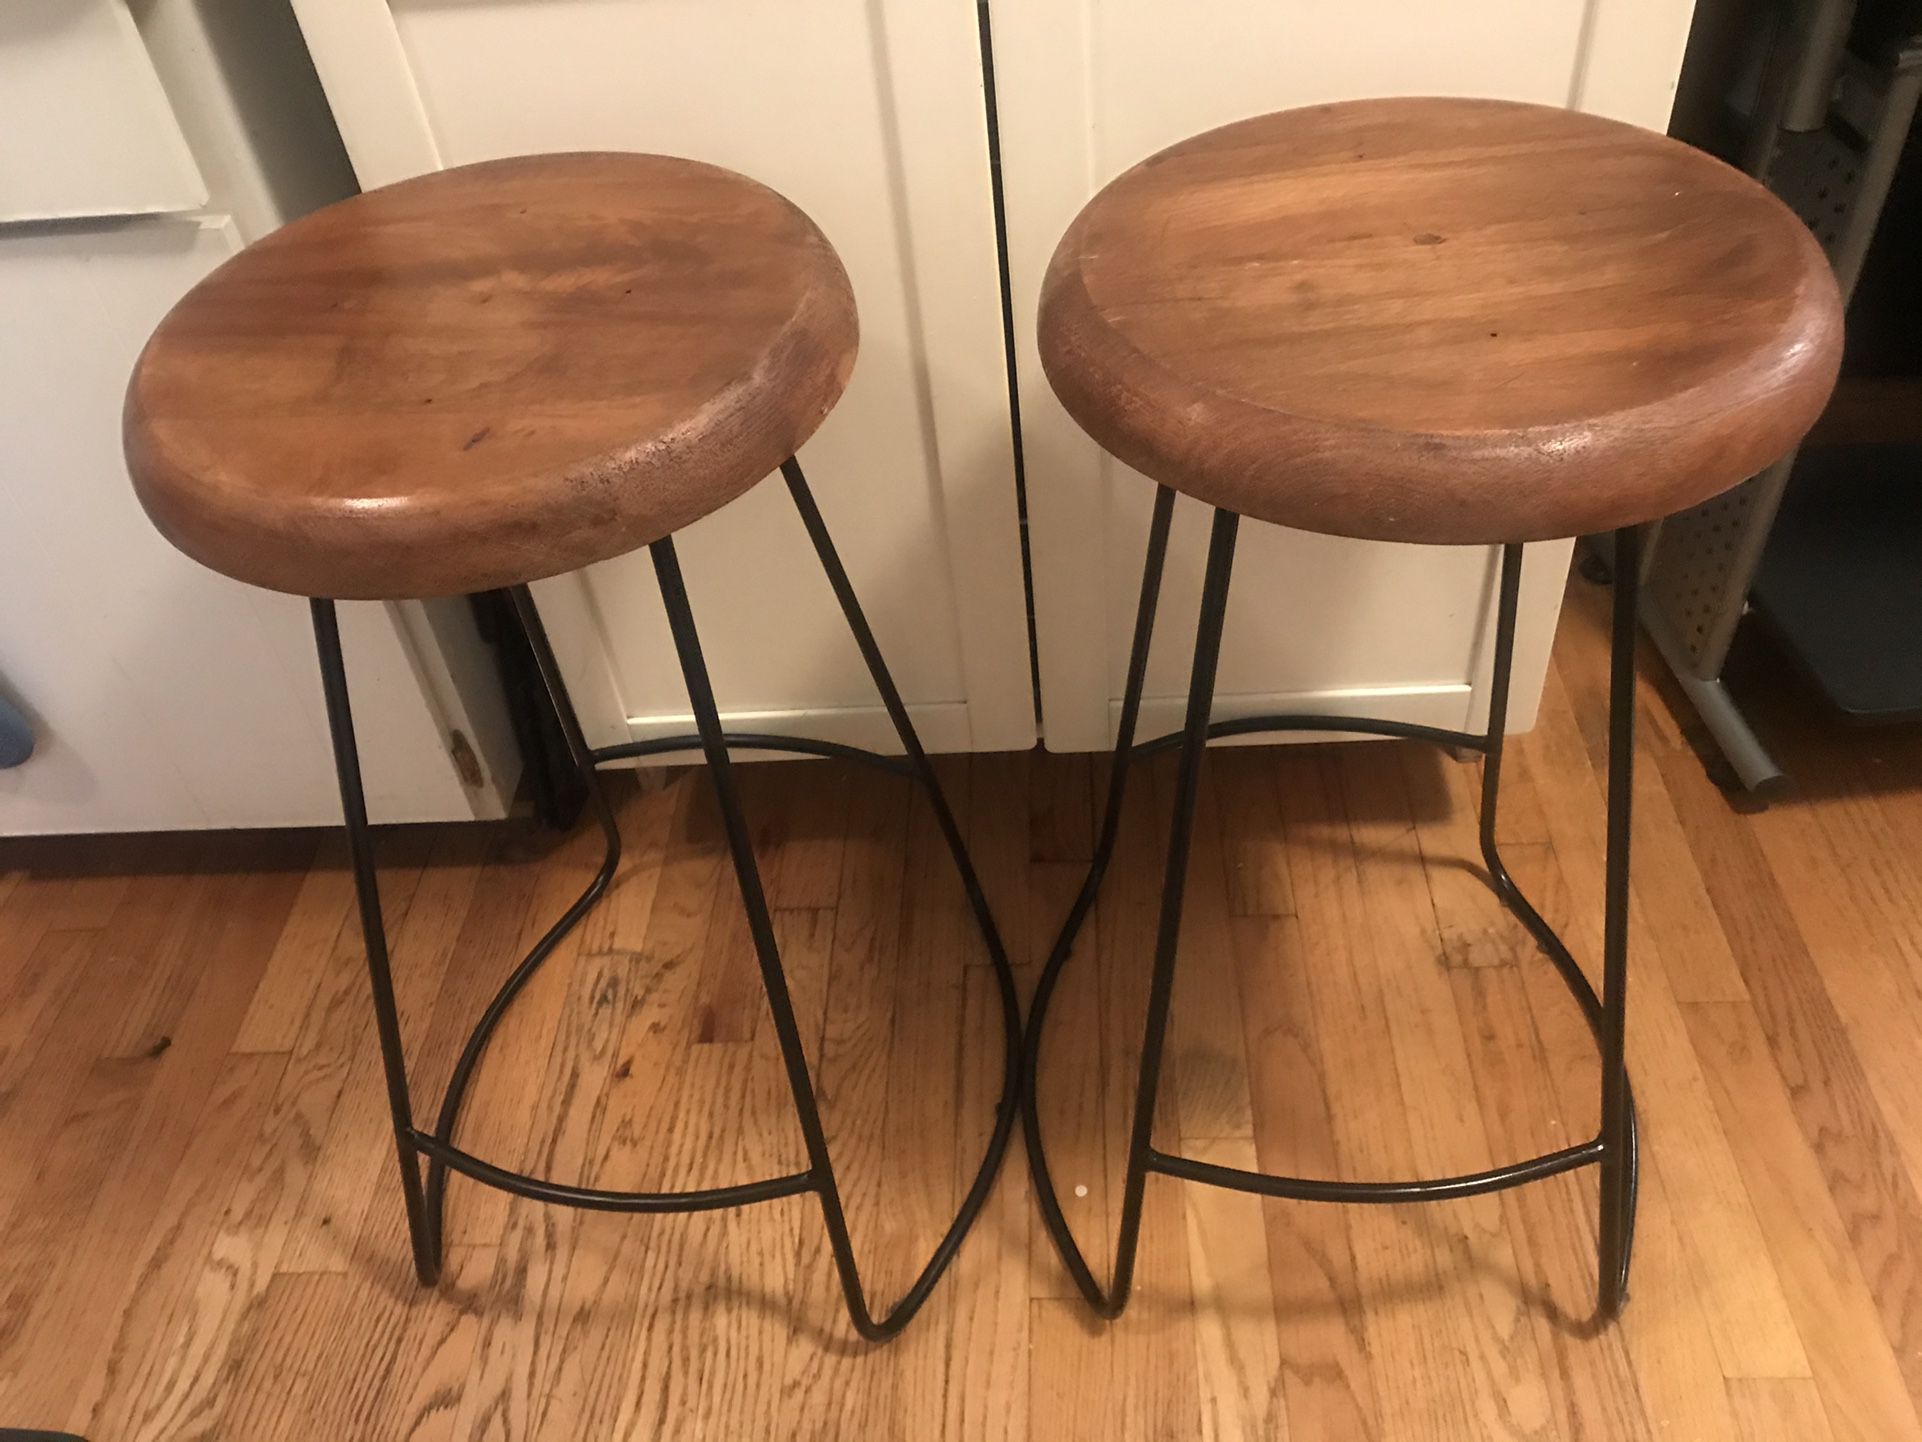 Like-new Wooden Seat Bar Stools ($30 each)